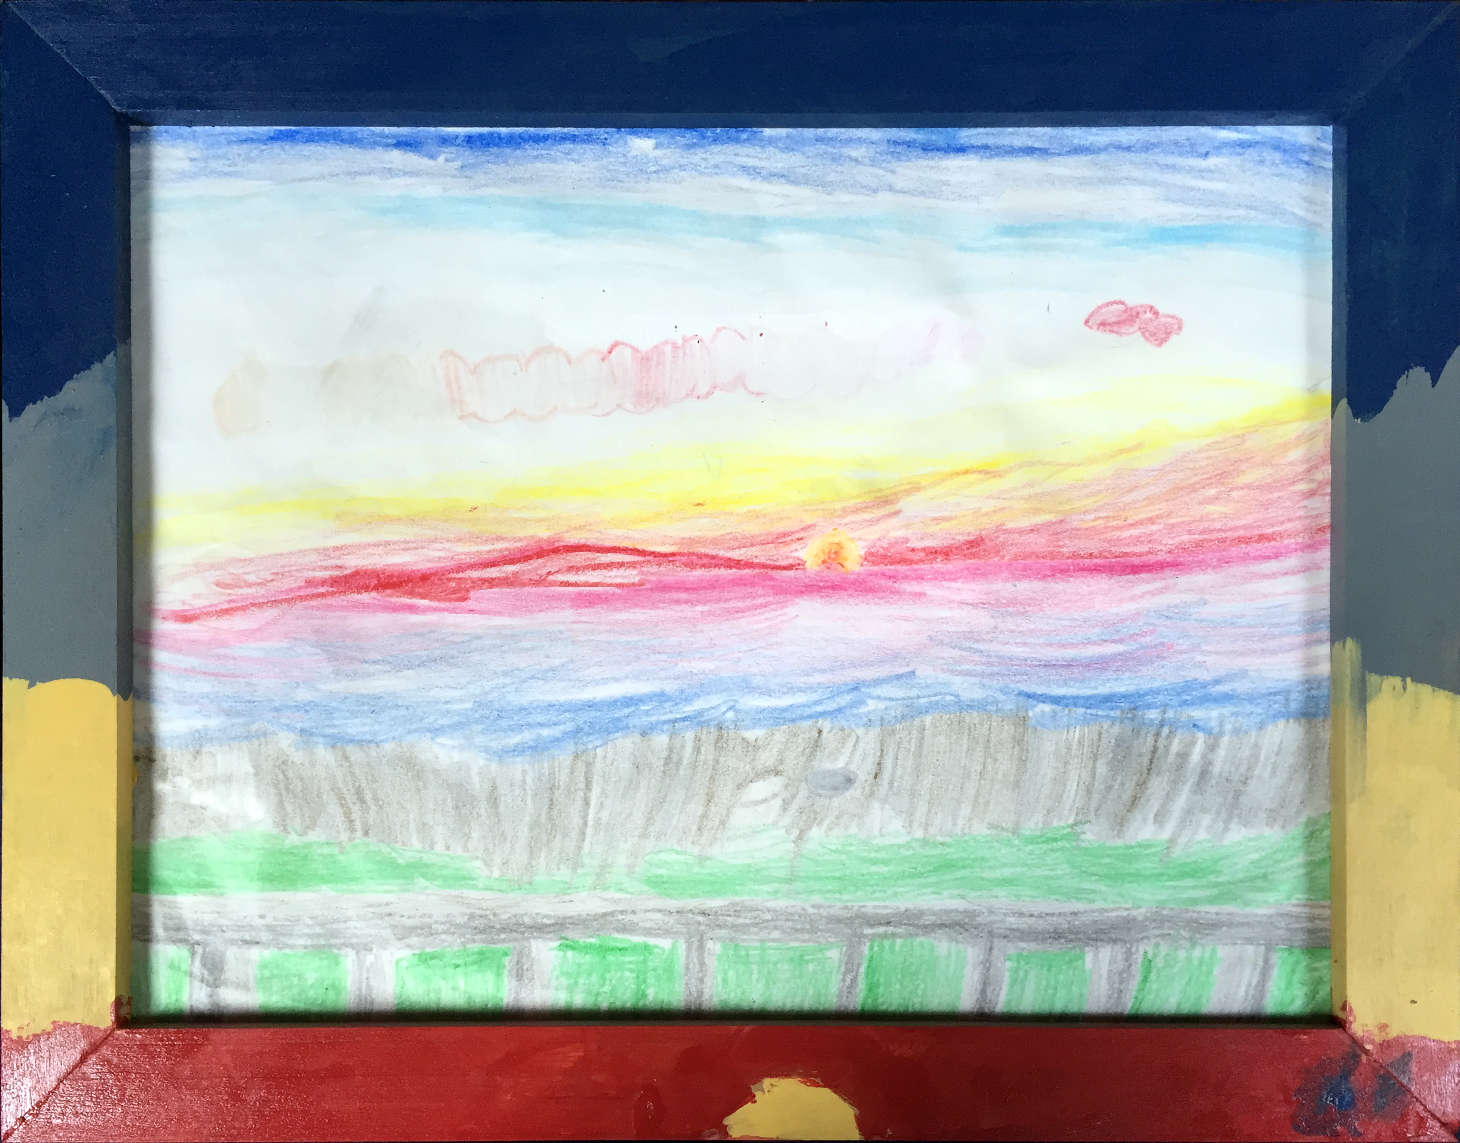 A sunset.  The sky is red, yellow, white, cyan, and dark blue.  There's a long, horizontal cloud, with many colors, yellow on the left, then orange, red, and pink.  There's another pink cloud to the right.  The sun is halfway below the horizon, and is a darkish orange in the middle, and a bright yellow around the outside.  Below the horizon is the ocean, which is magenta, then purple, then blue.  Below that is the beach, with some seashells visible, and then some grass and a rail.  Around the picture is a wooden frame; the top part of the frame is painted dark blue, then below that gray, below that yellow, and at the bottom red.  There's a yellow half-sun painted at the bottom of the frame.